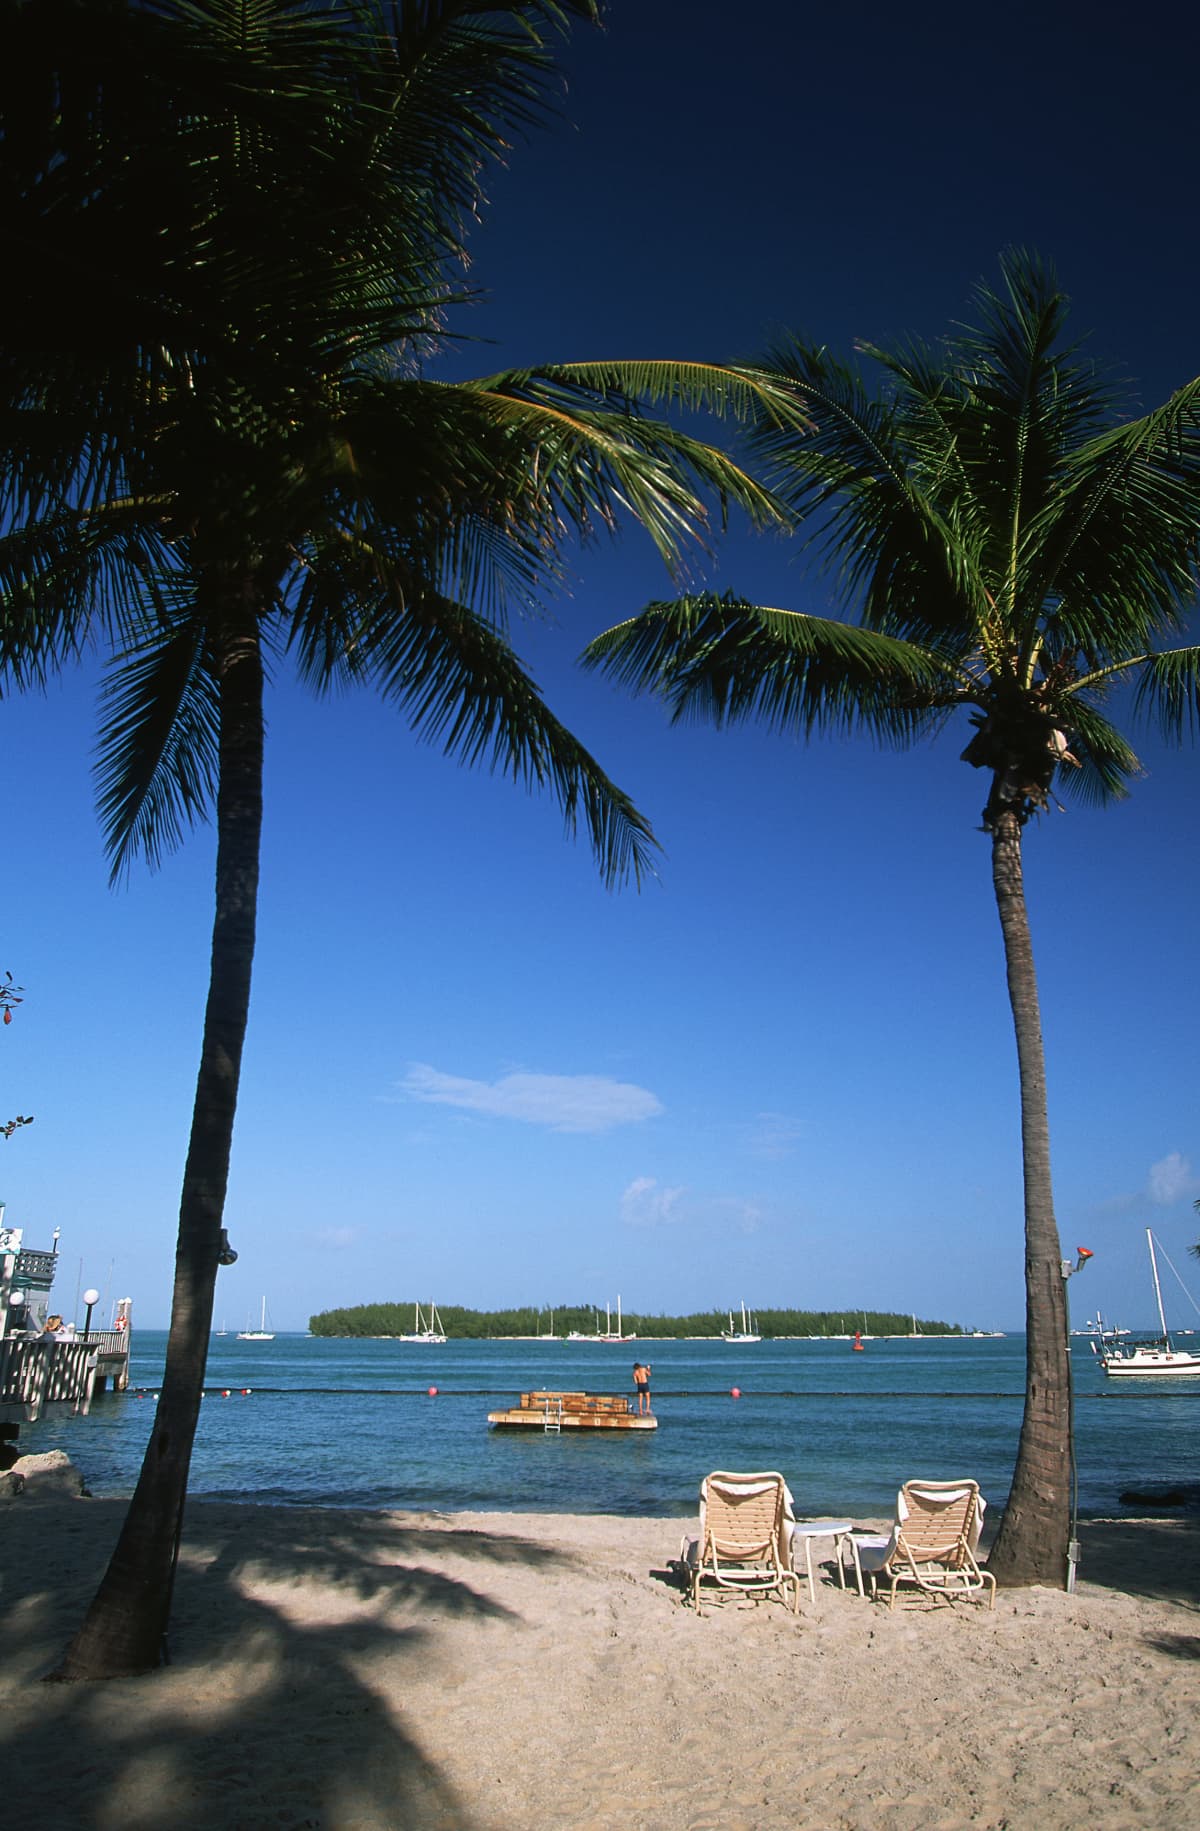 View of the ocean, two palm tress, and two loungers from a beach in Key West, Florida